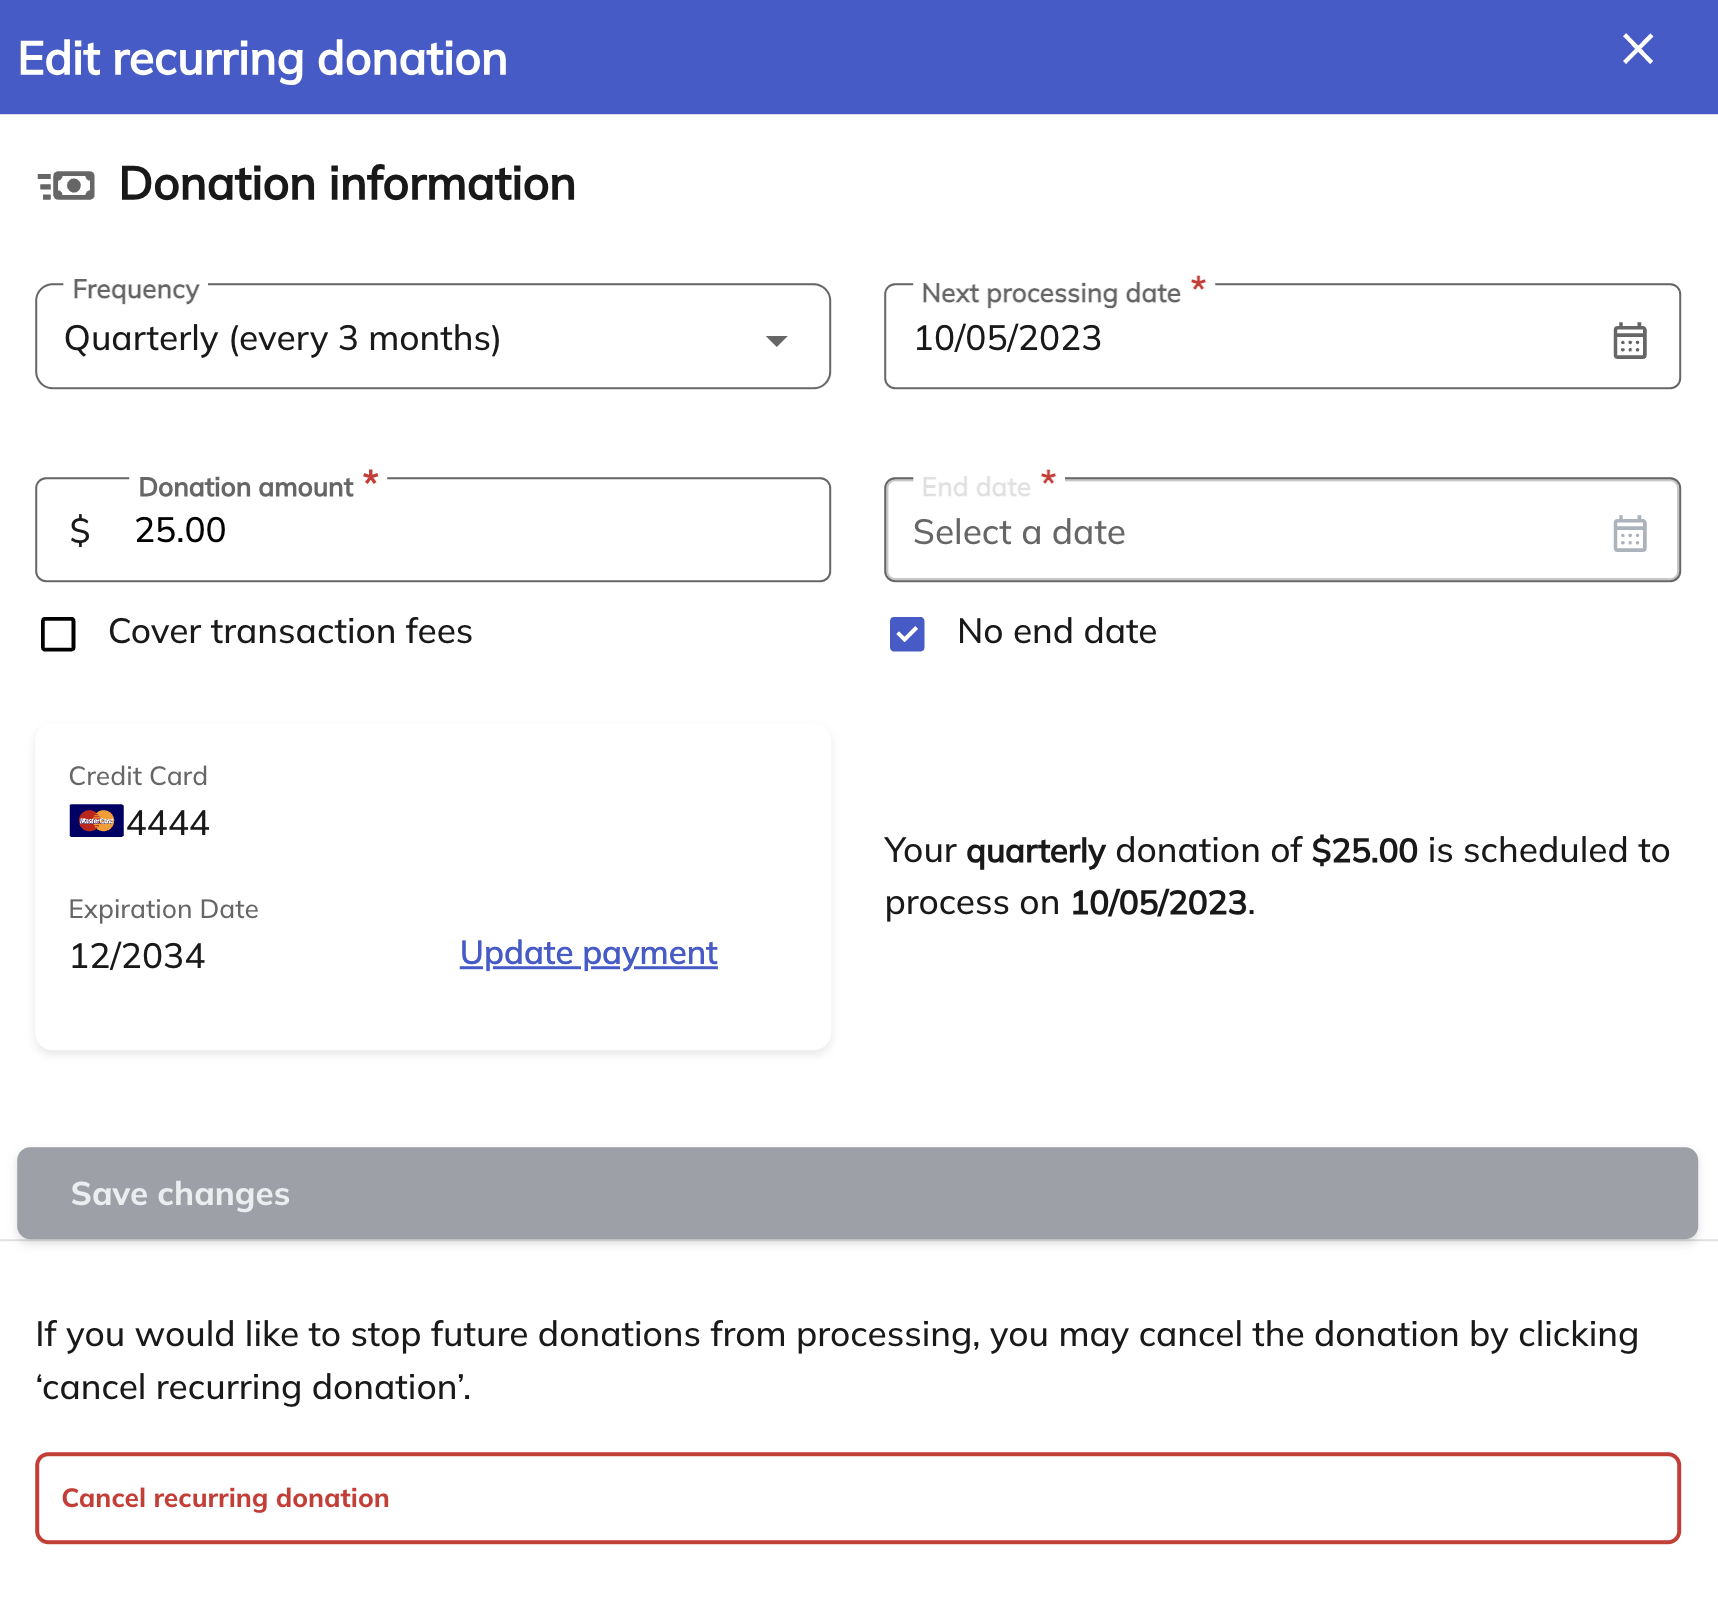 screenshot of the edit recurring donation form on Classy